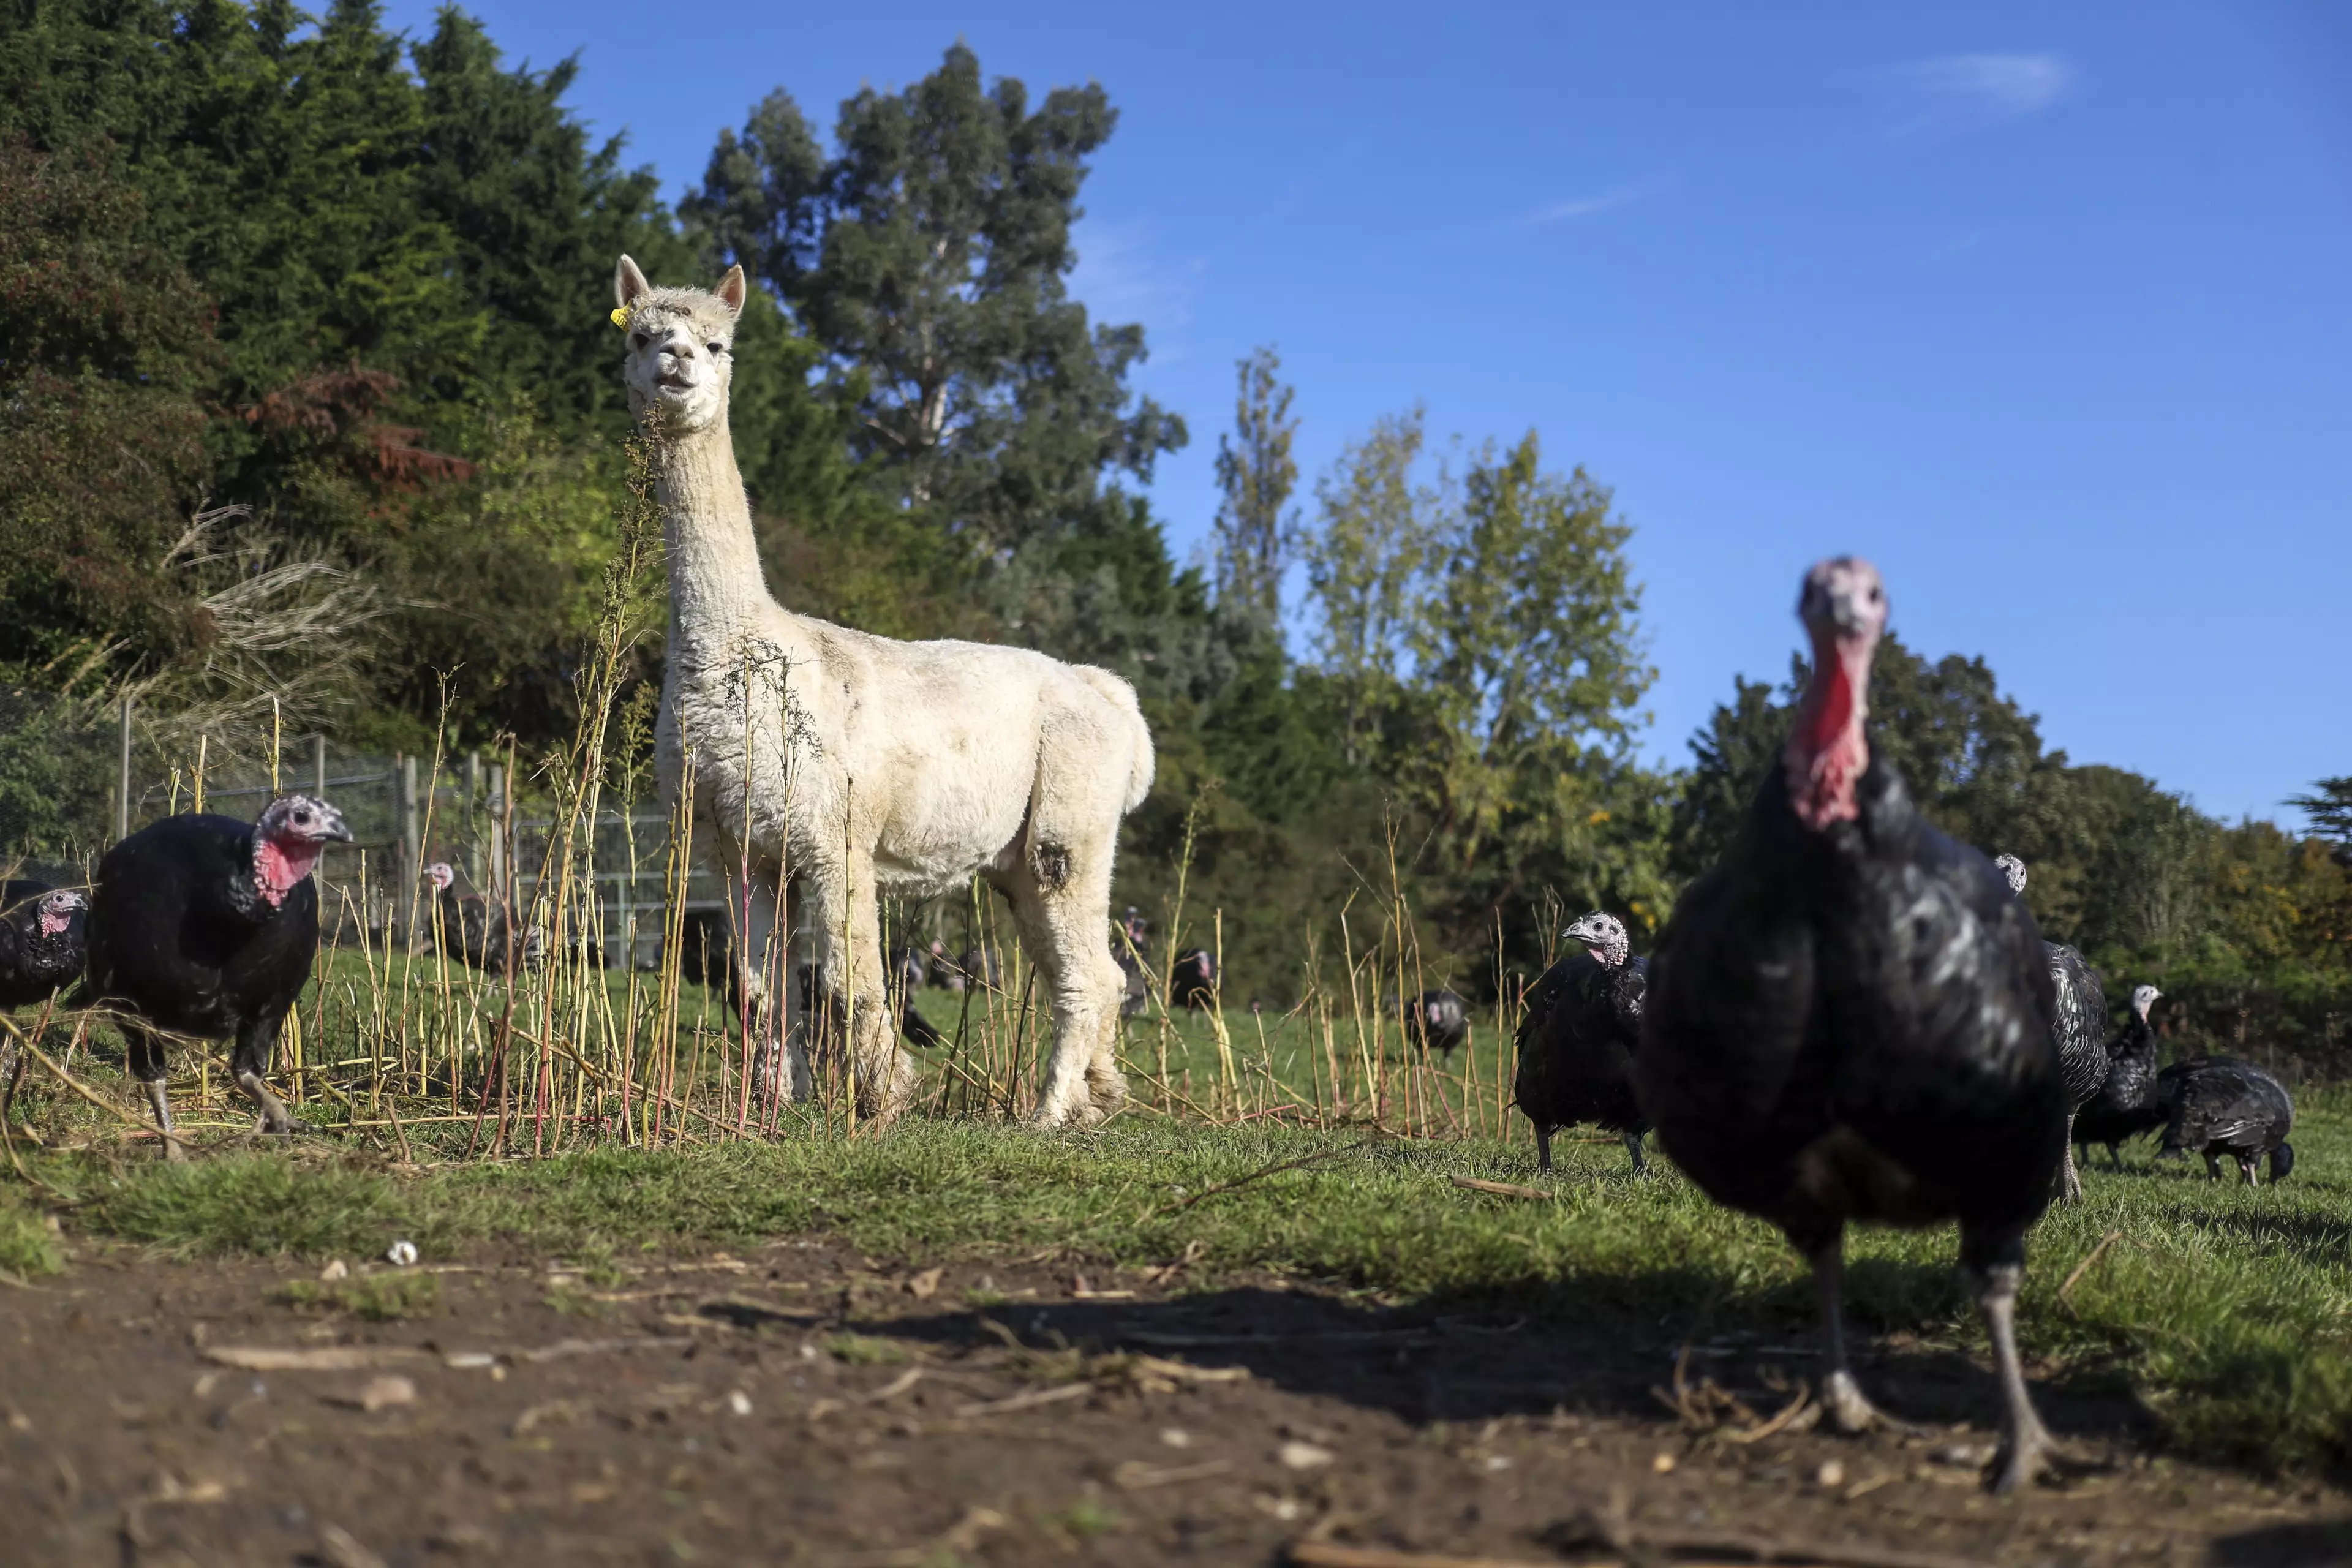 The turkeys at the Copas Traditional Turkeys farm have some new - and very fluffy - bodyguards.